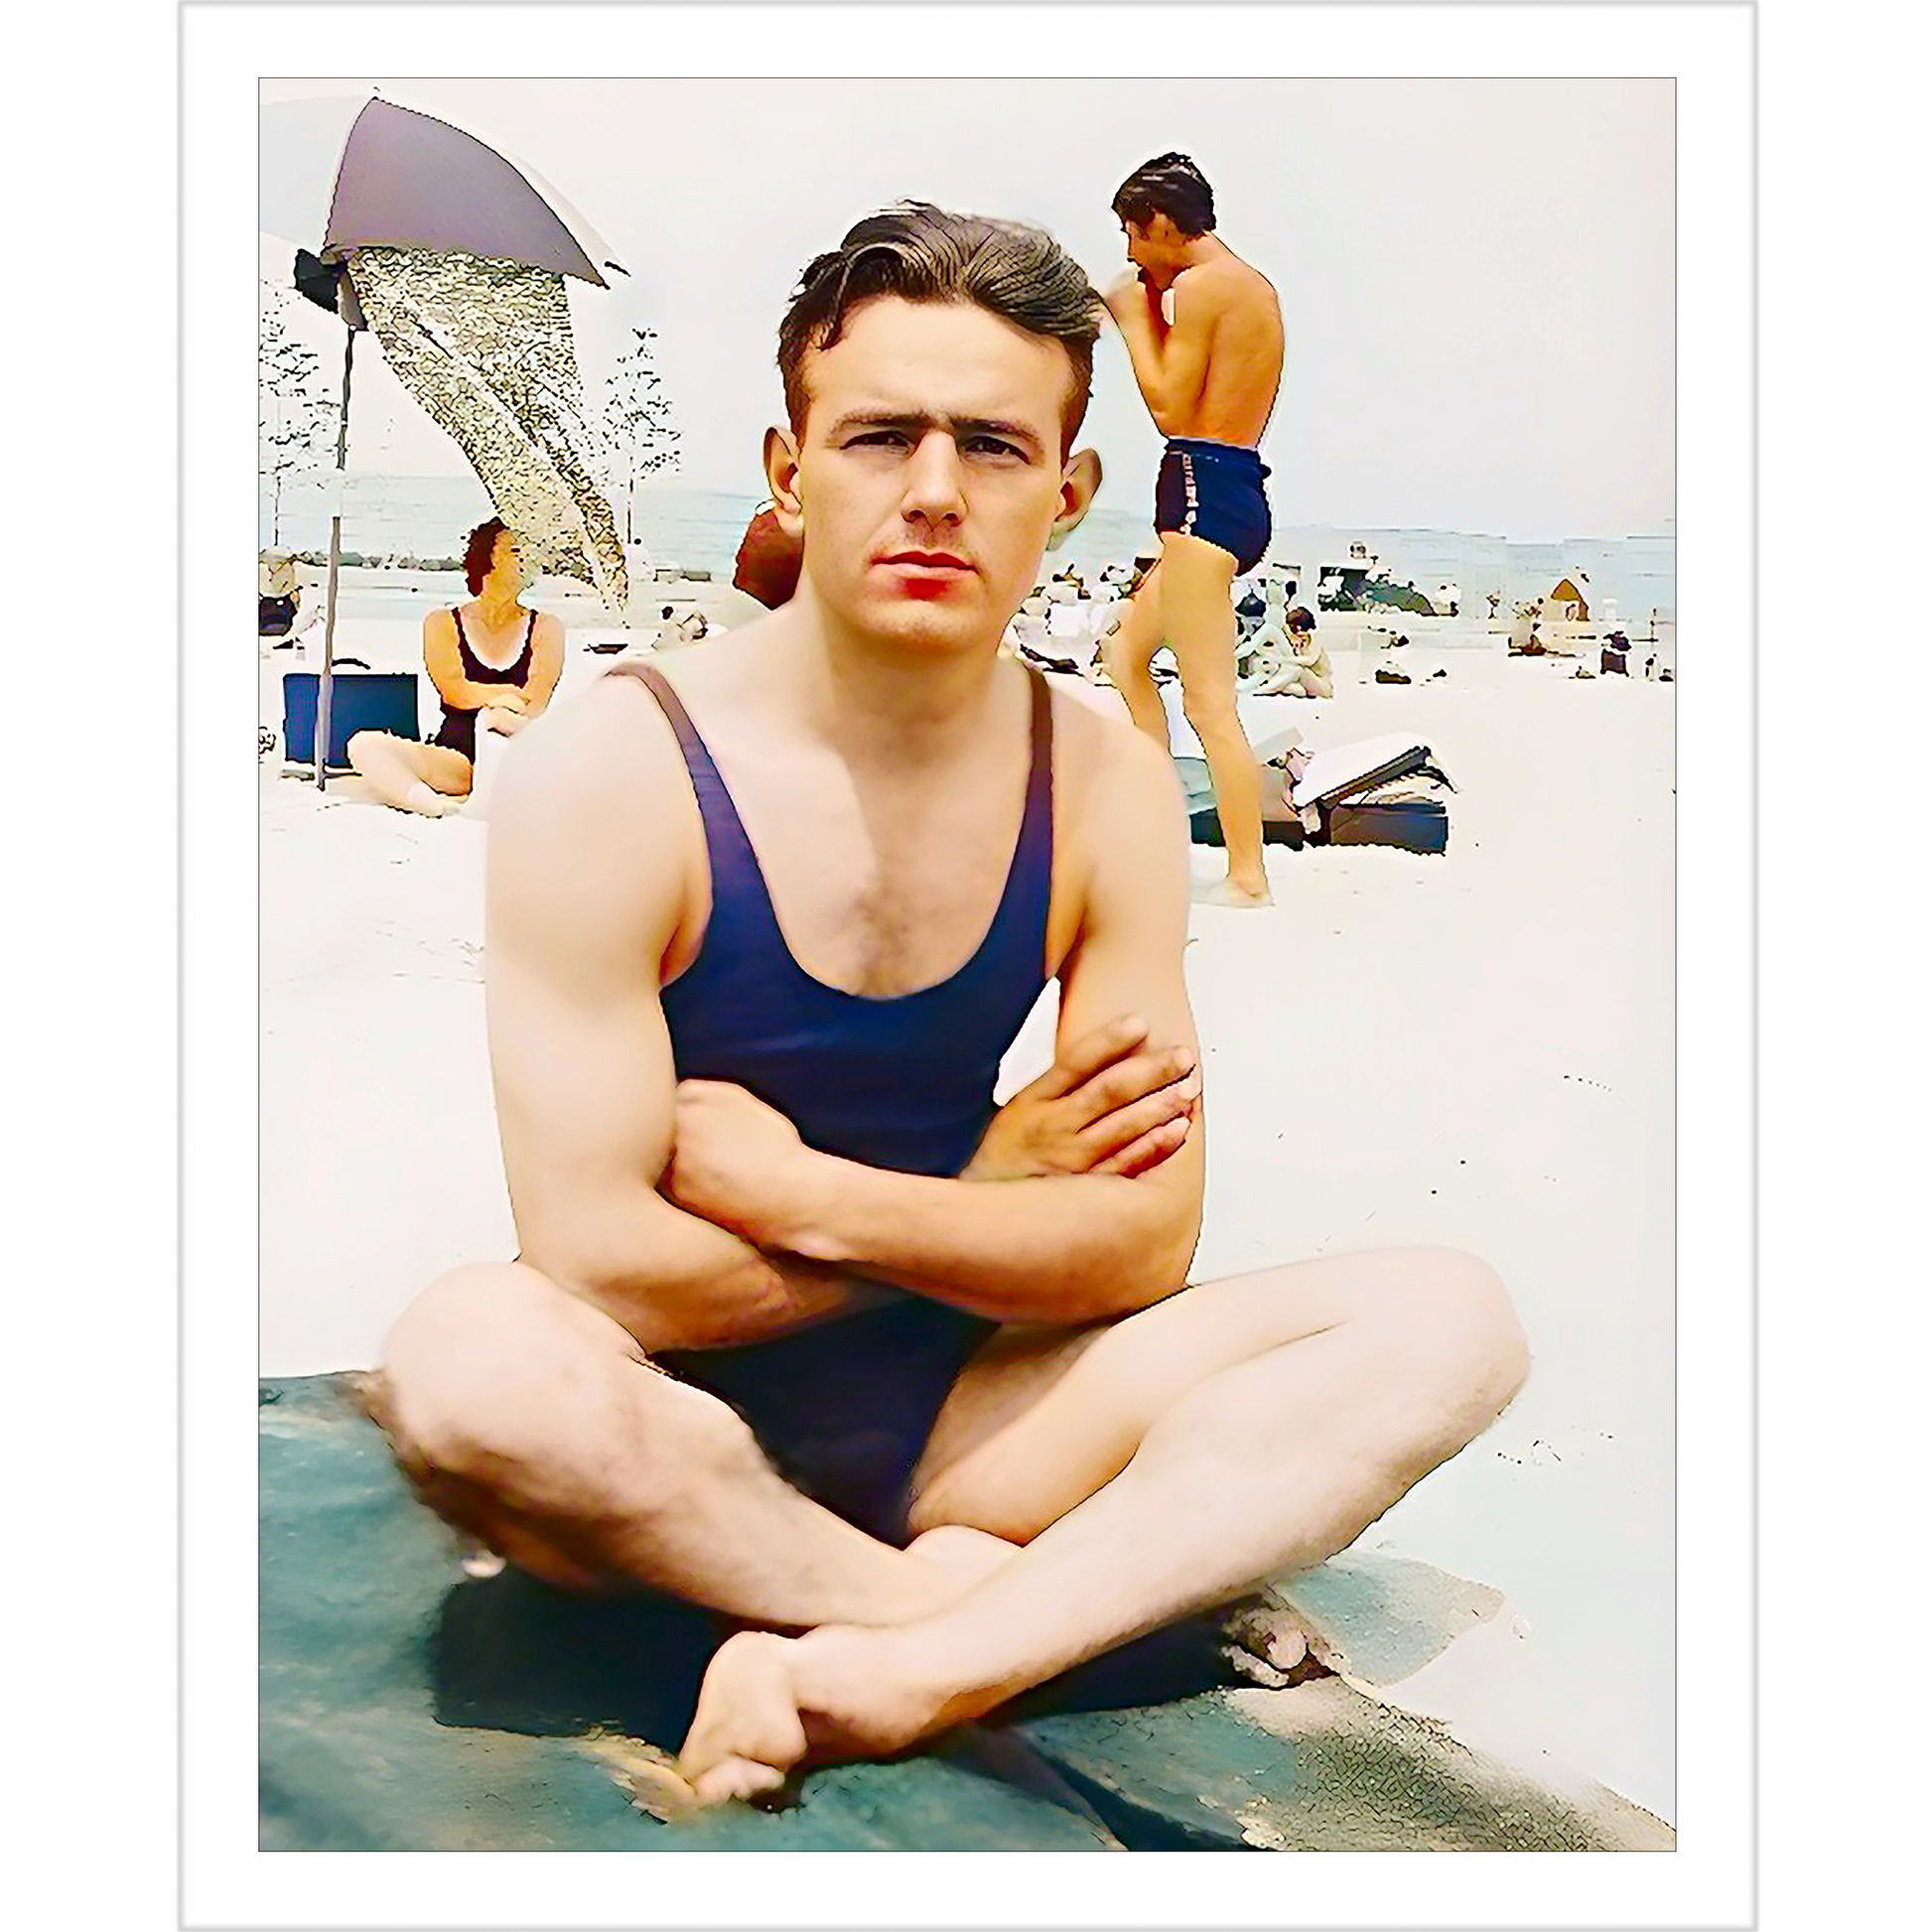 nager 007 | Giclee Artist Print Myrtle Beach South Carolina Vintage Photo Gay Queer LGBTQ Bathing Suit